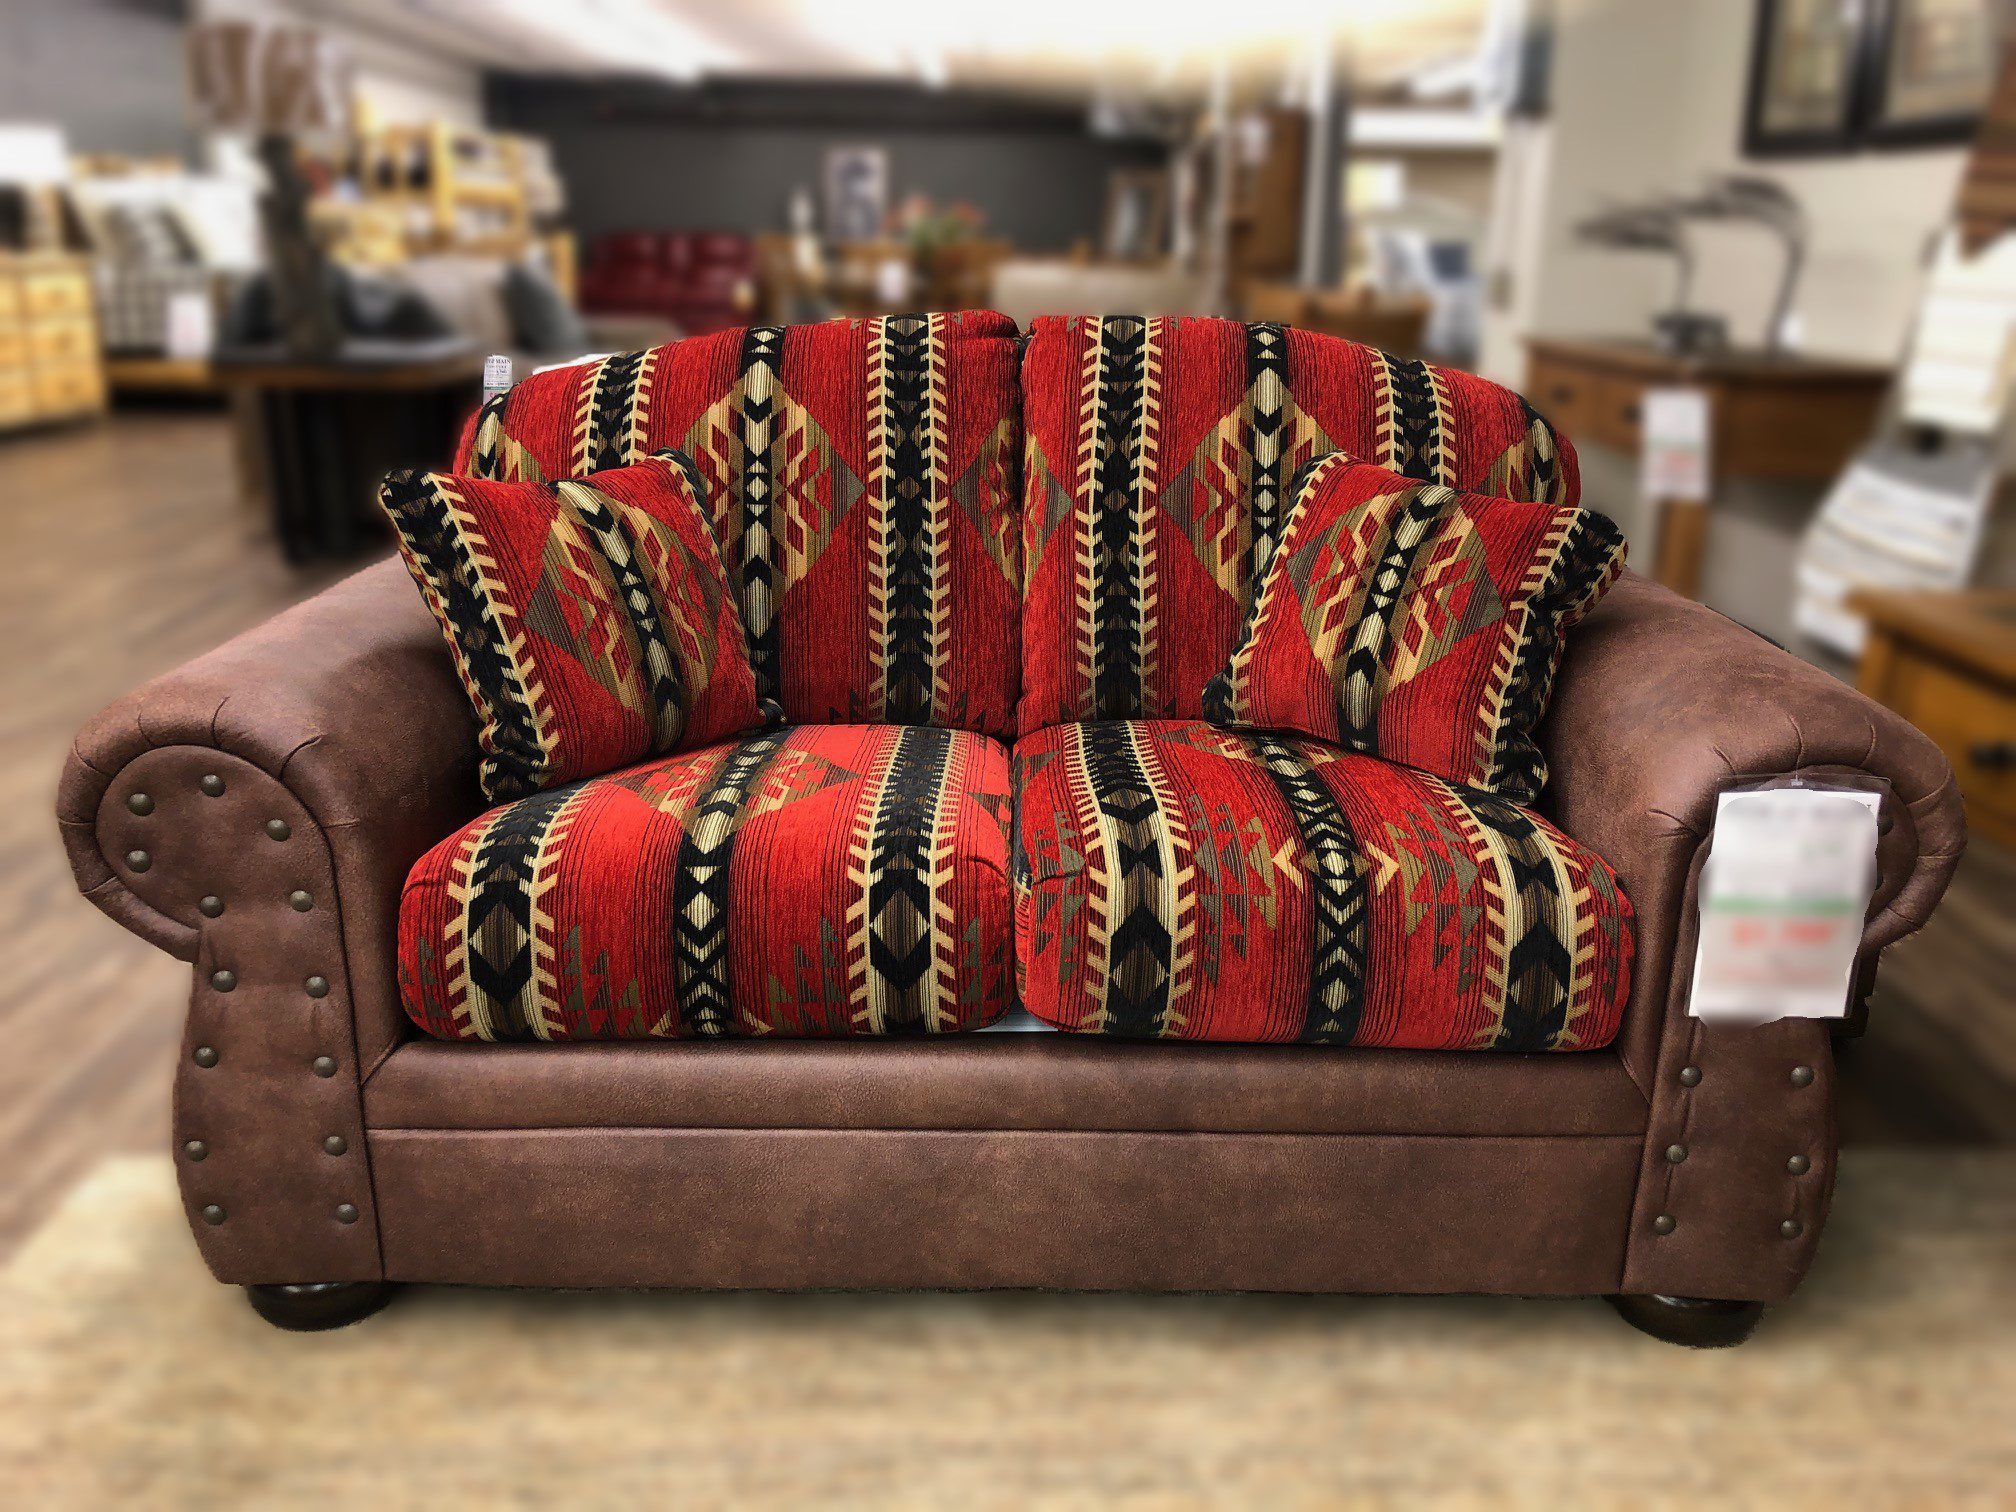 Arbuckle Loveseat W/Nails